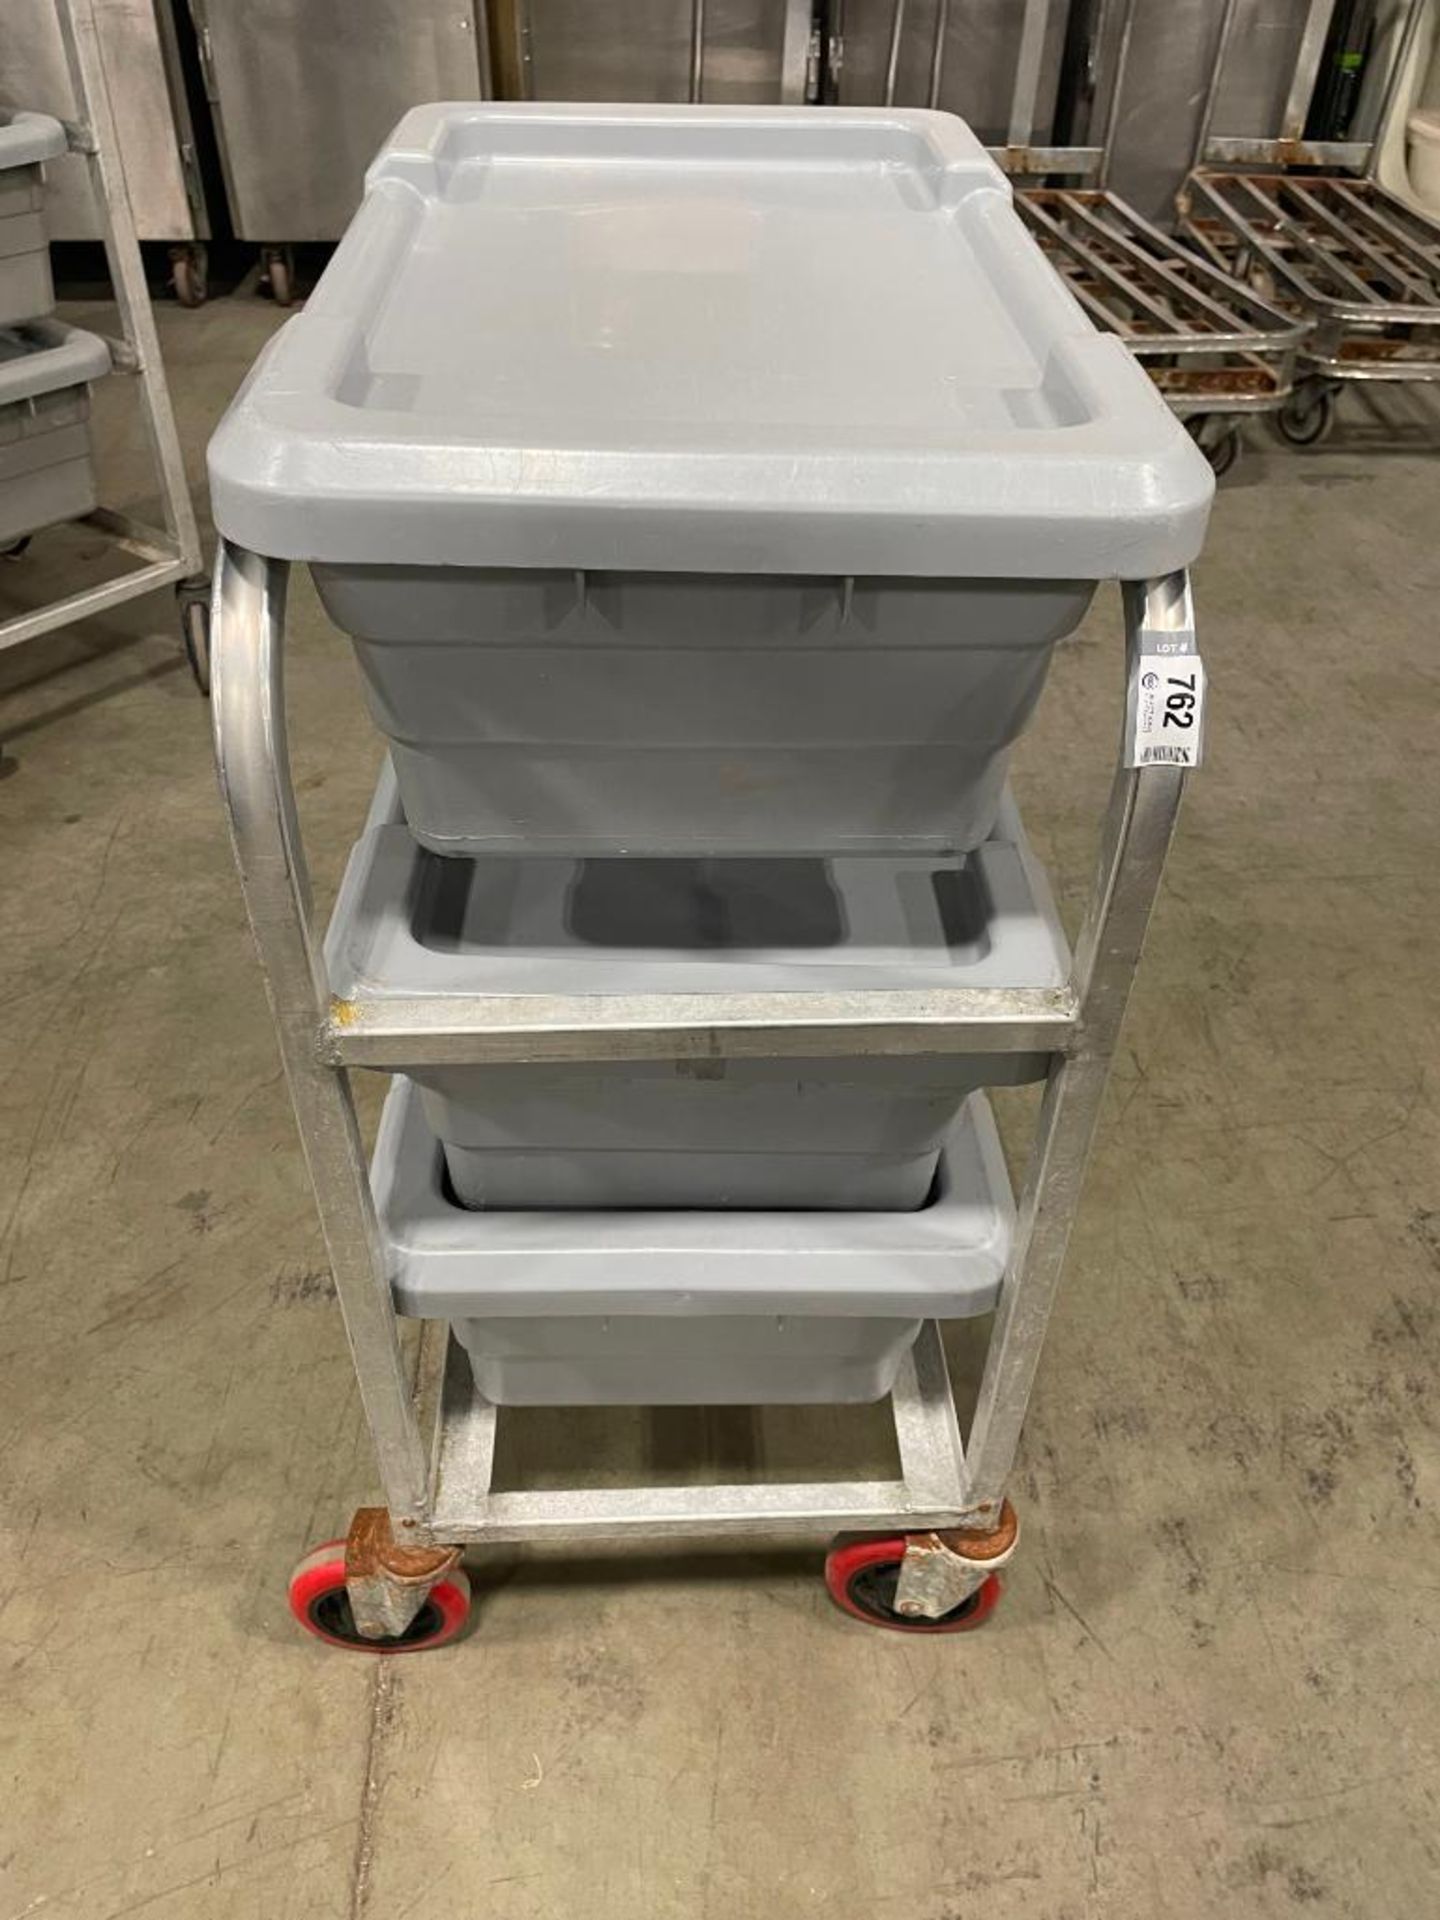 WIN-HOLT EQUIPMENT 2-TIER LUG CART WITH (3) POLY LUGS - Image 2 of 4